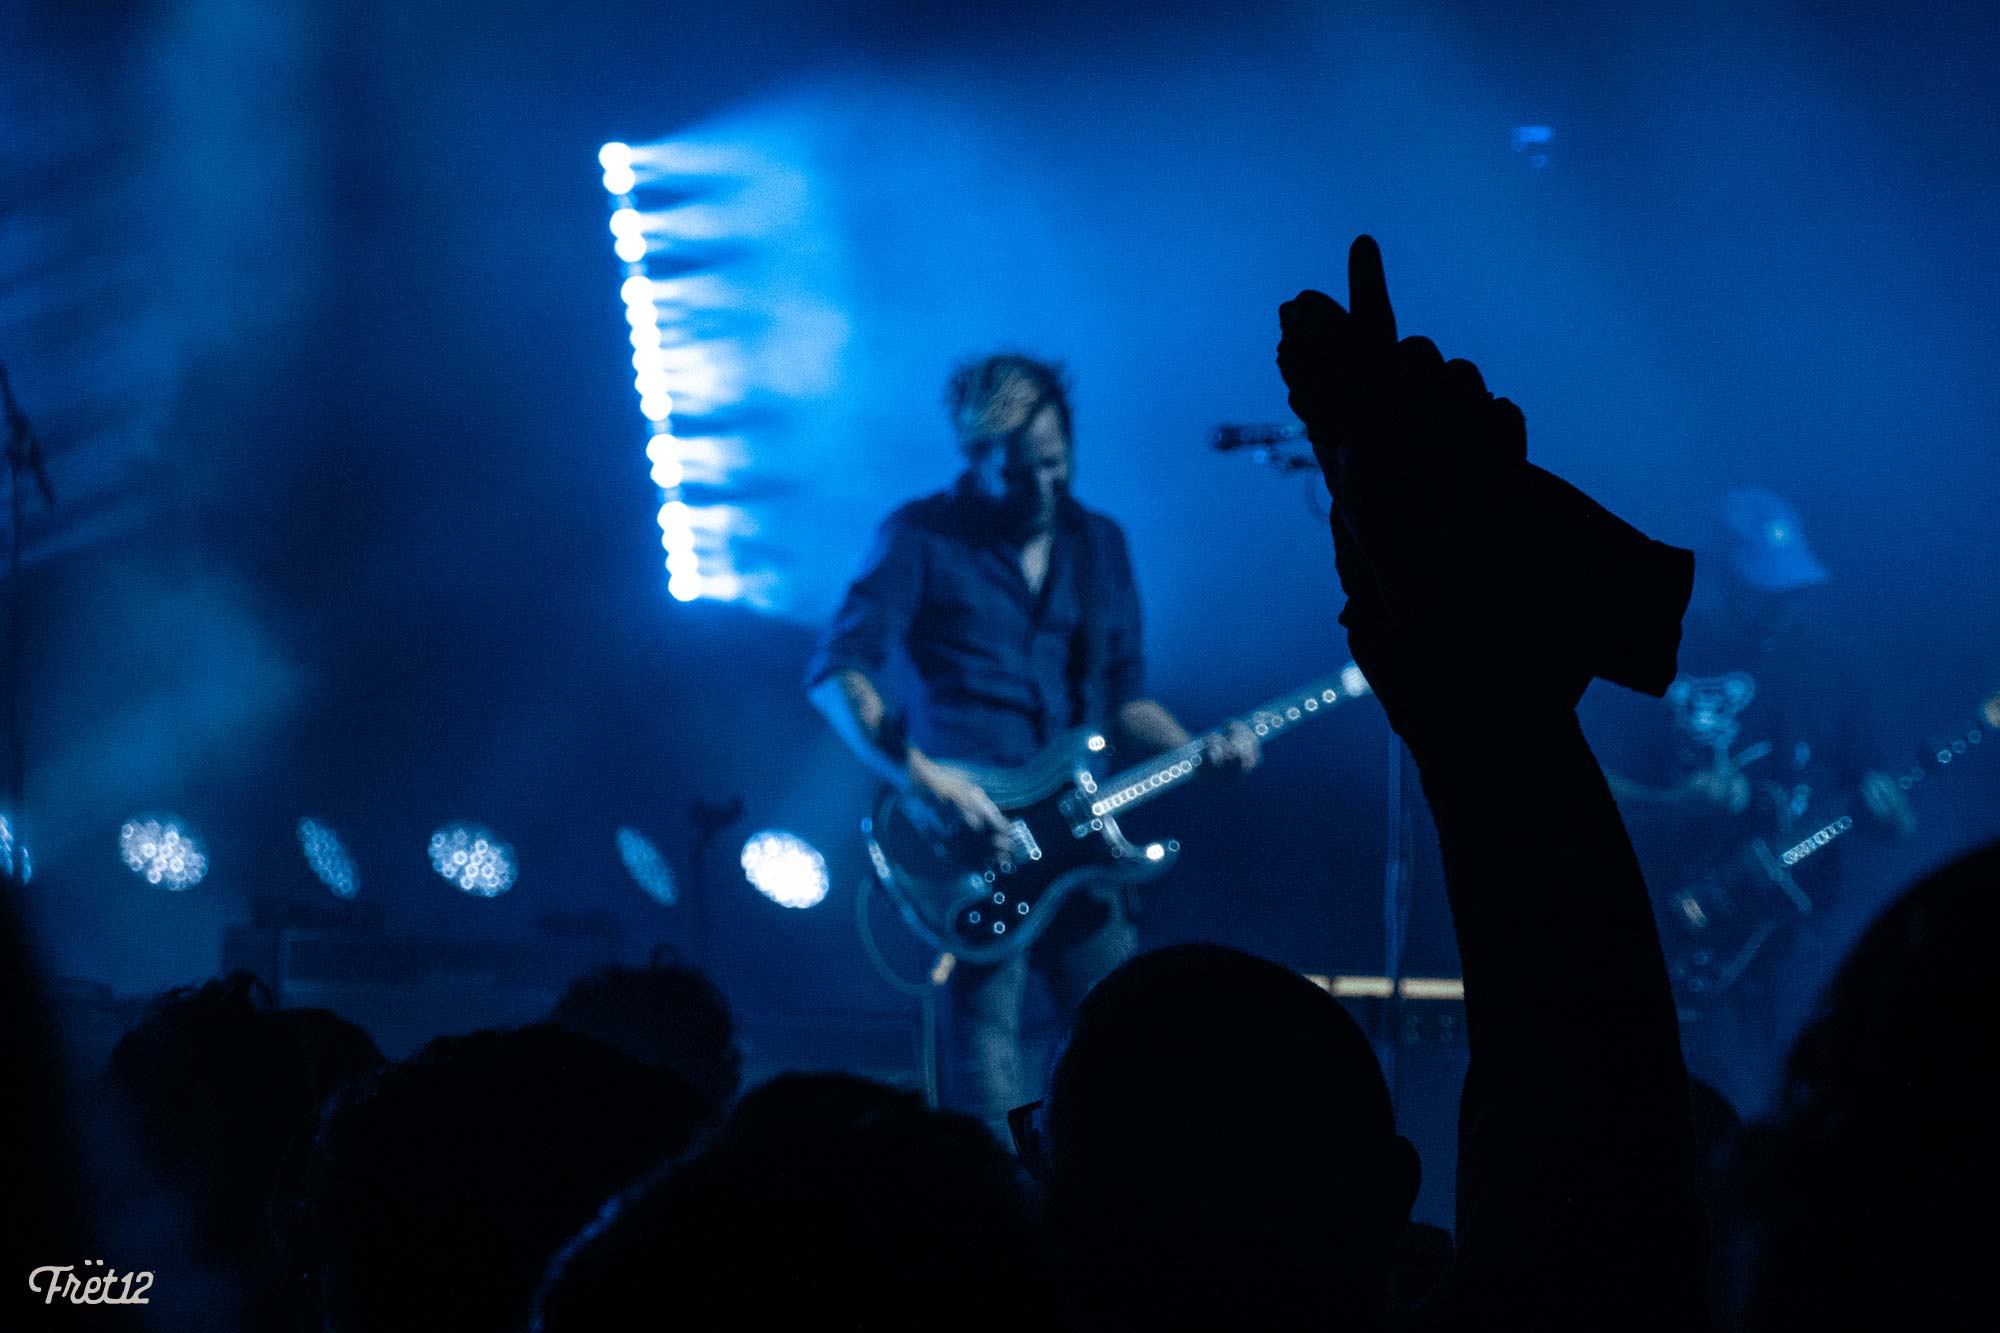 Band of Horses at The Salt Shed - Photos by FRET12